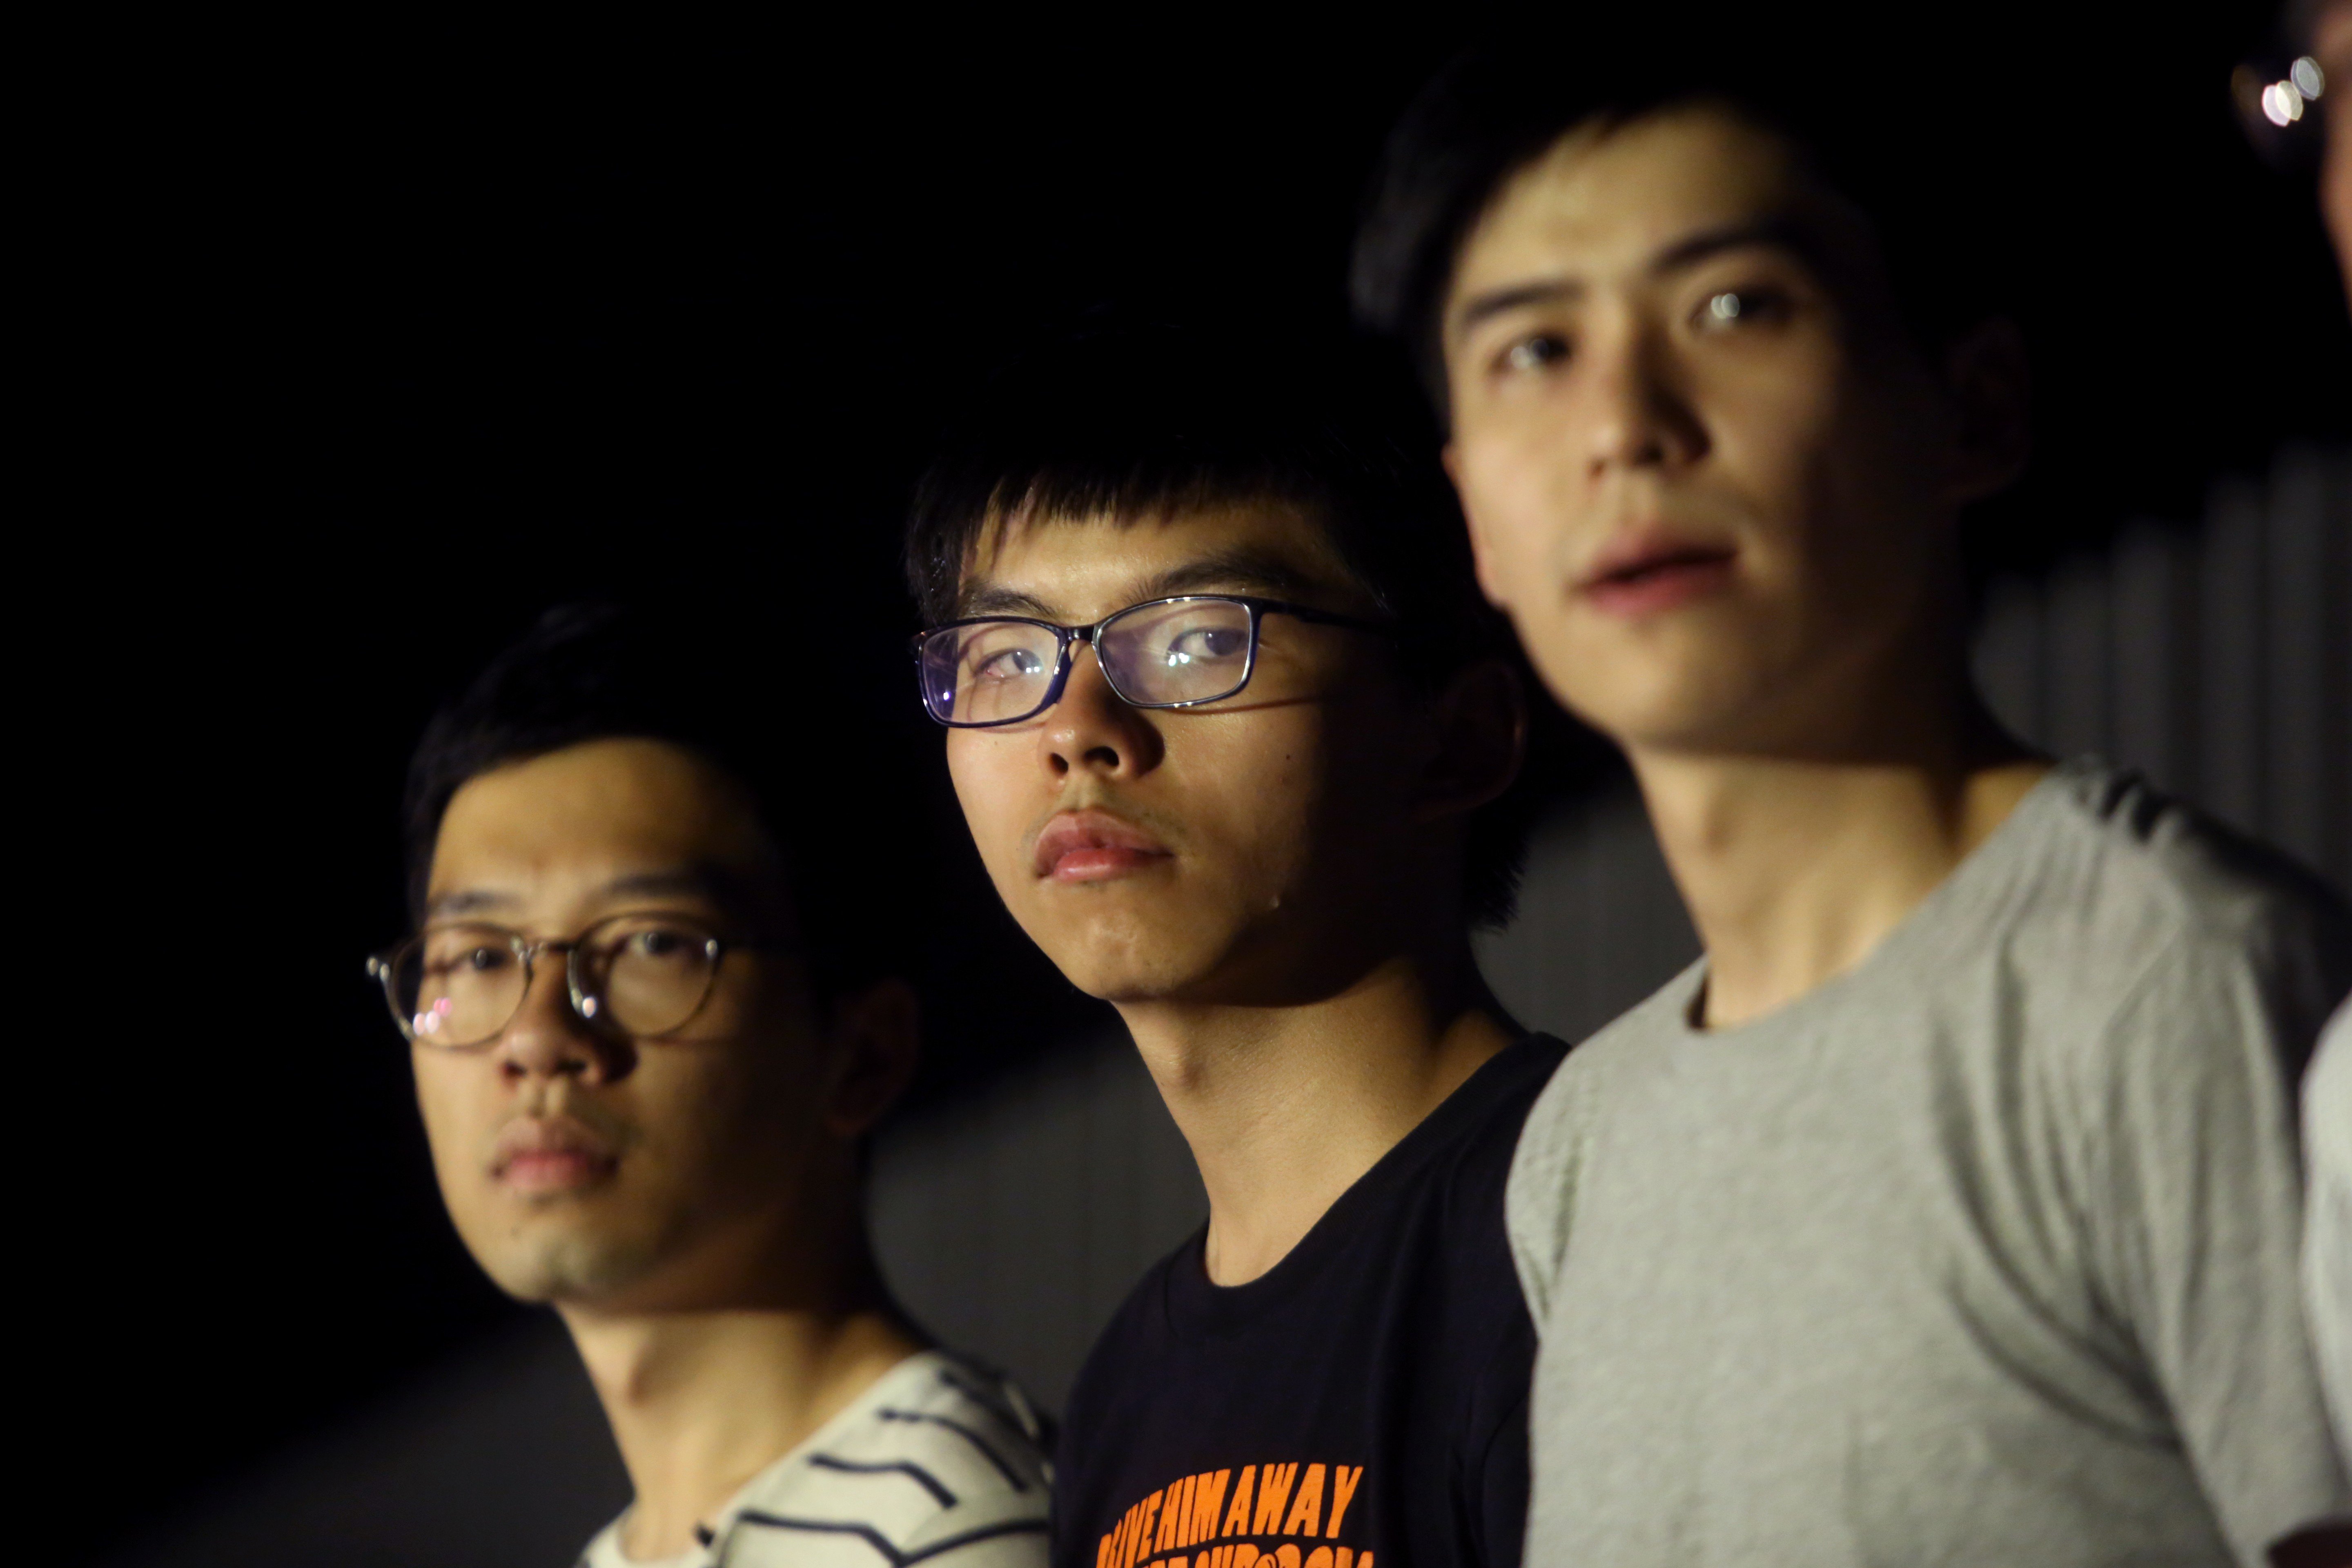 Ben Bland’s book includes interviews with Nathan Law (left), Joshua Wong (centre) and Lester Shum, as well as “super tutors” and artists. Photo: Sam Tsang